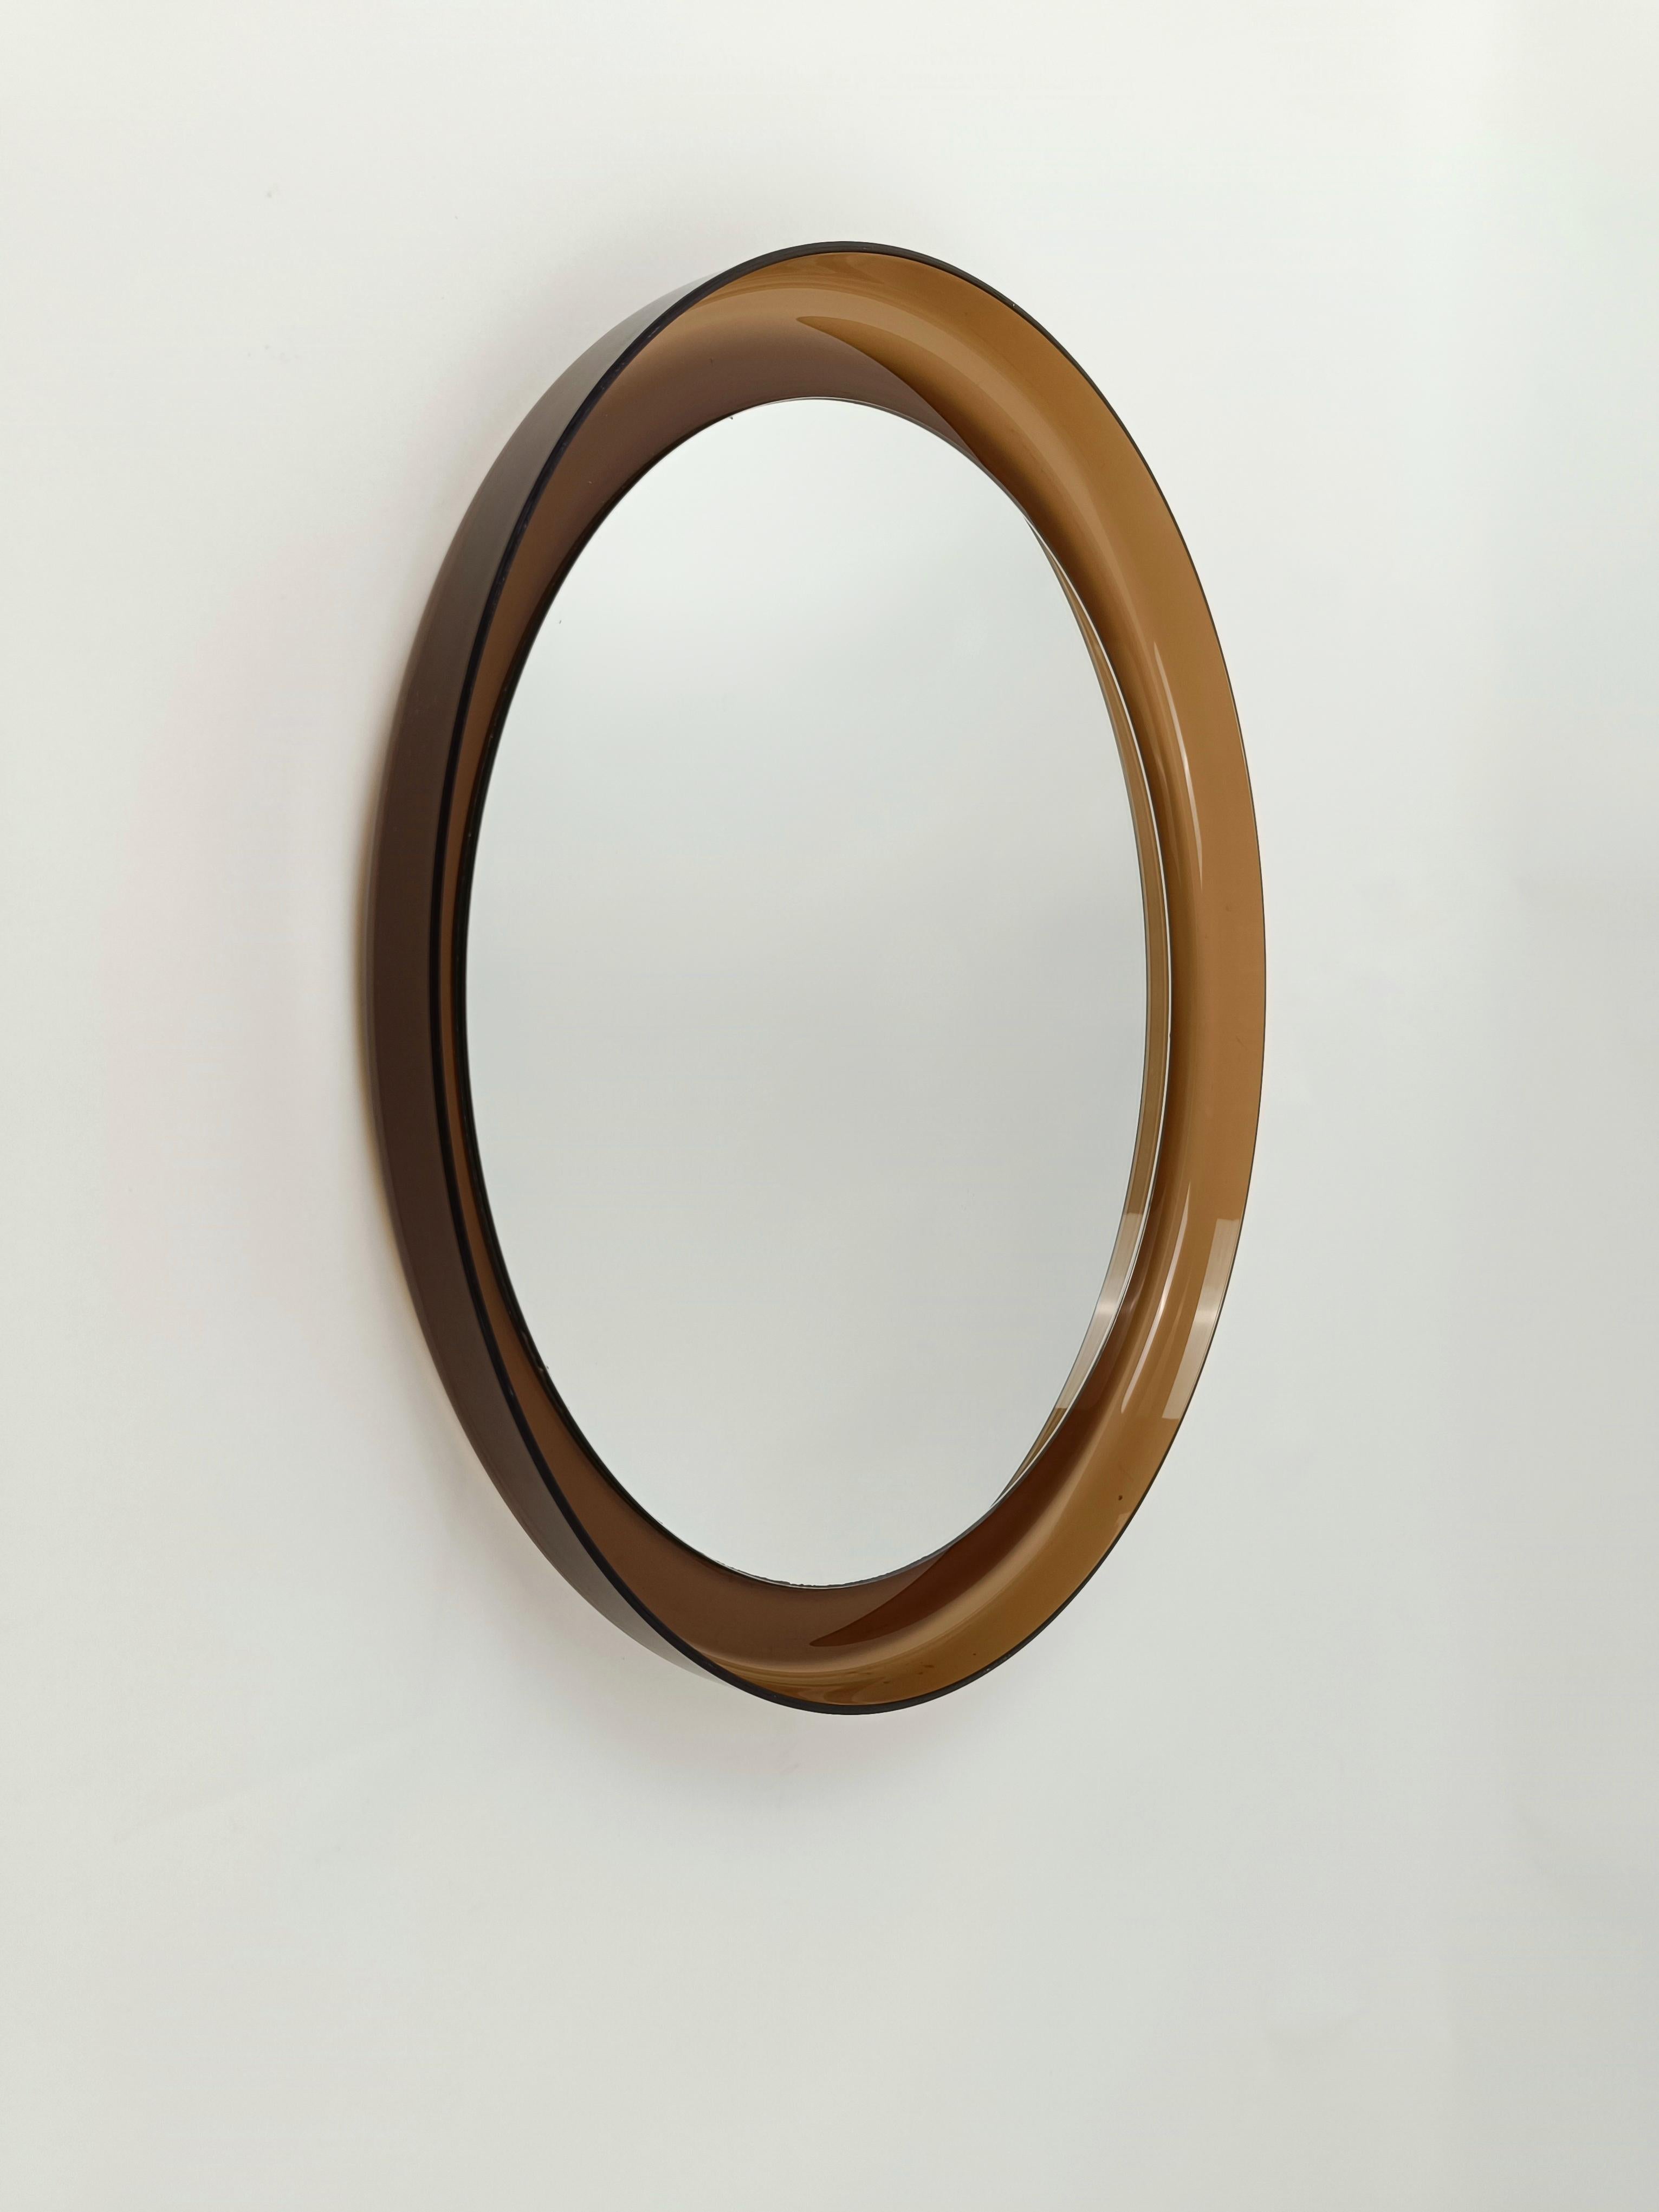 An Italian Space Age Round Mirror in Smoked Lucite by Guzzini 1960s  For Sale 2